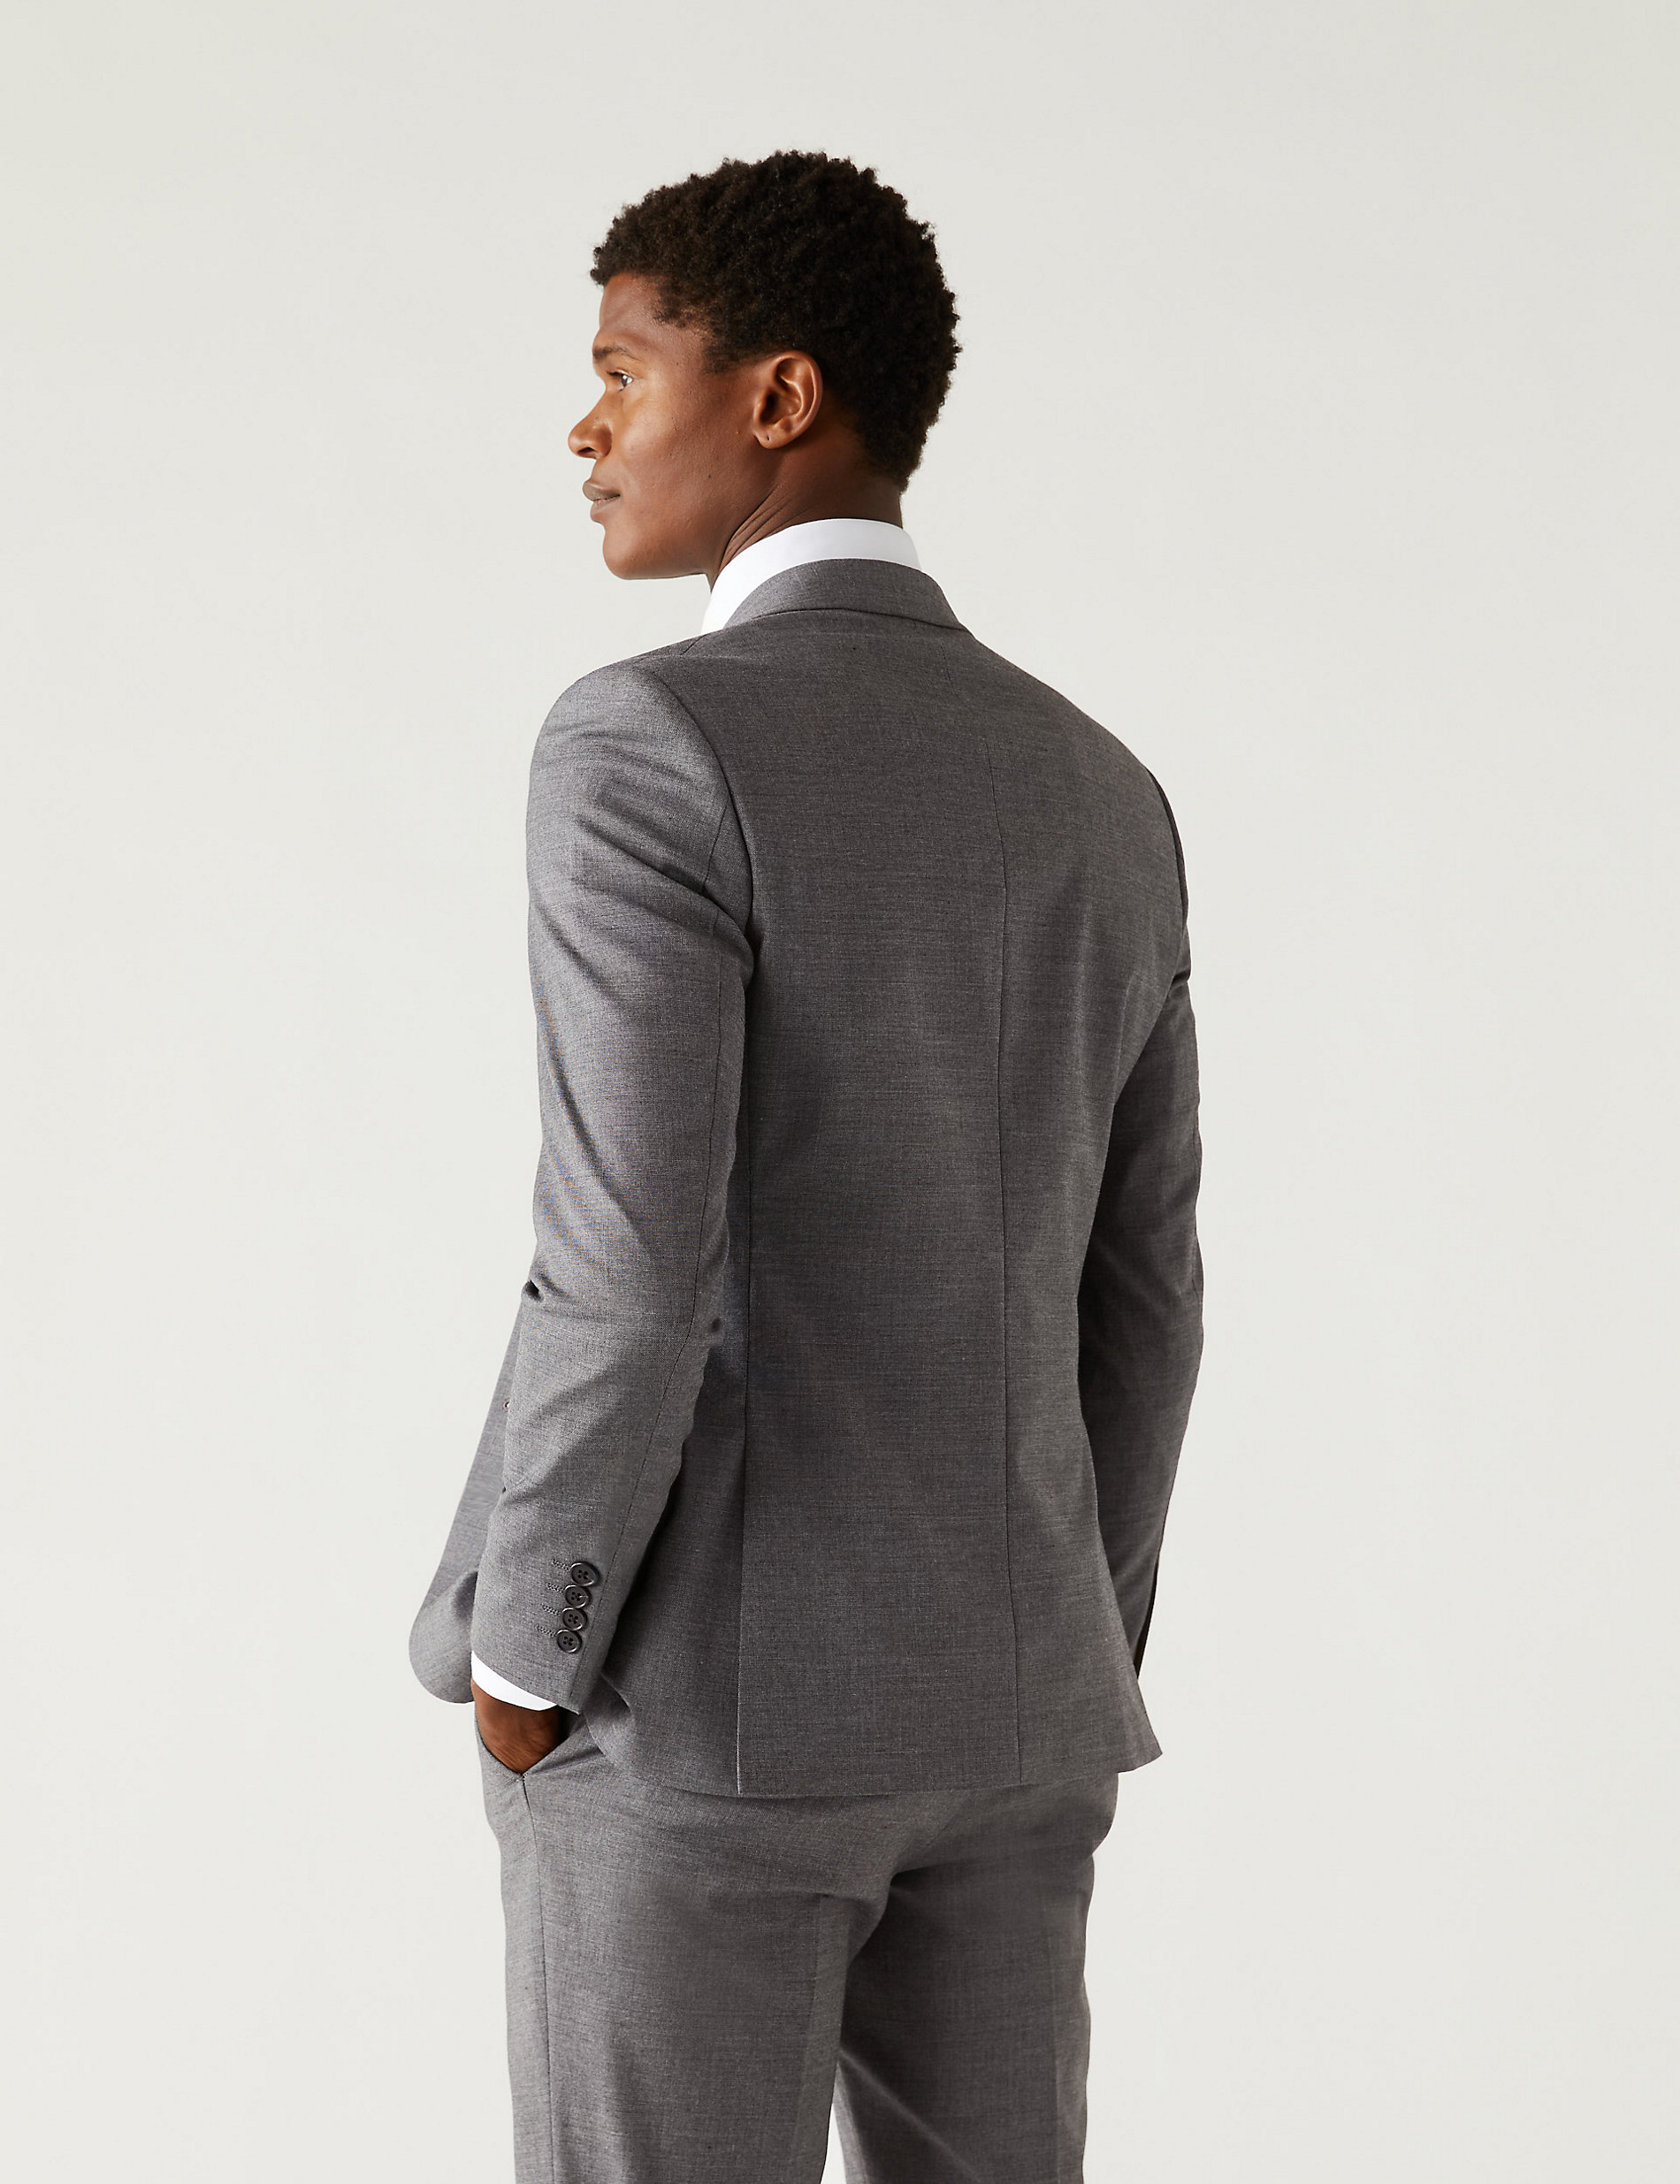 Skinny Fit Sharkskin Suit Jacket with Stretch